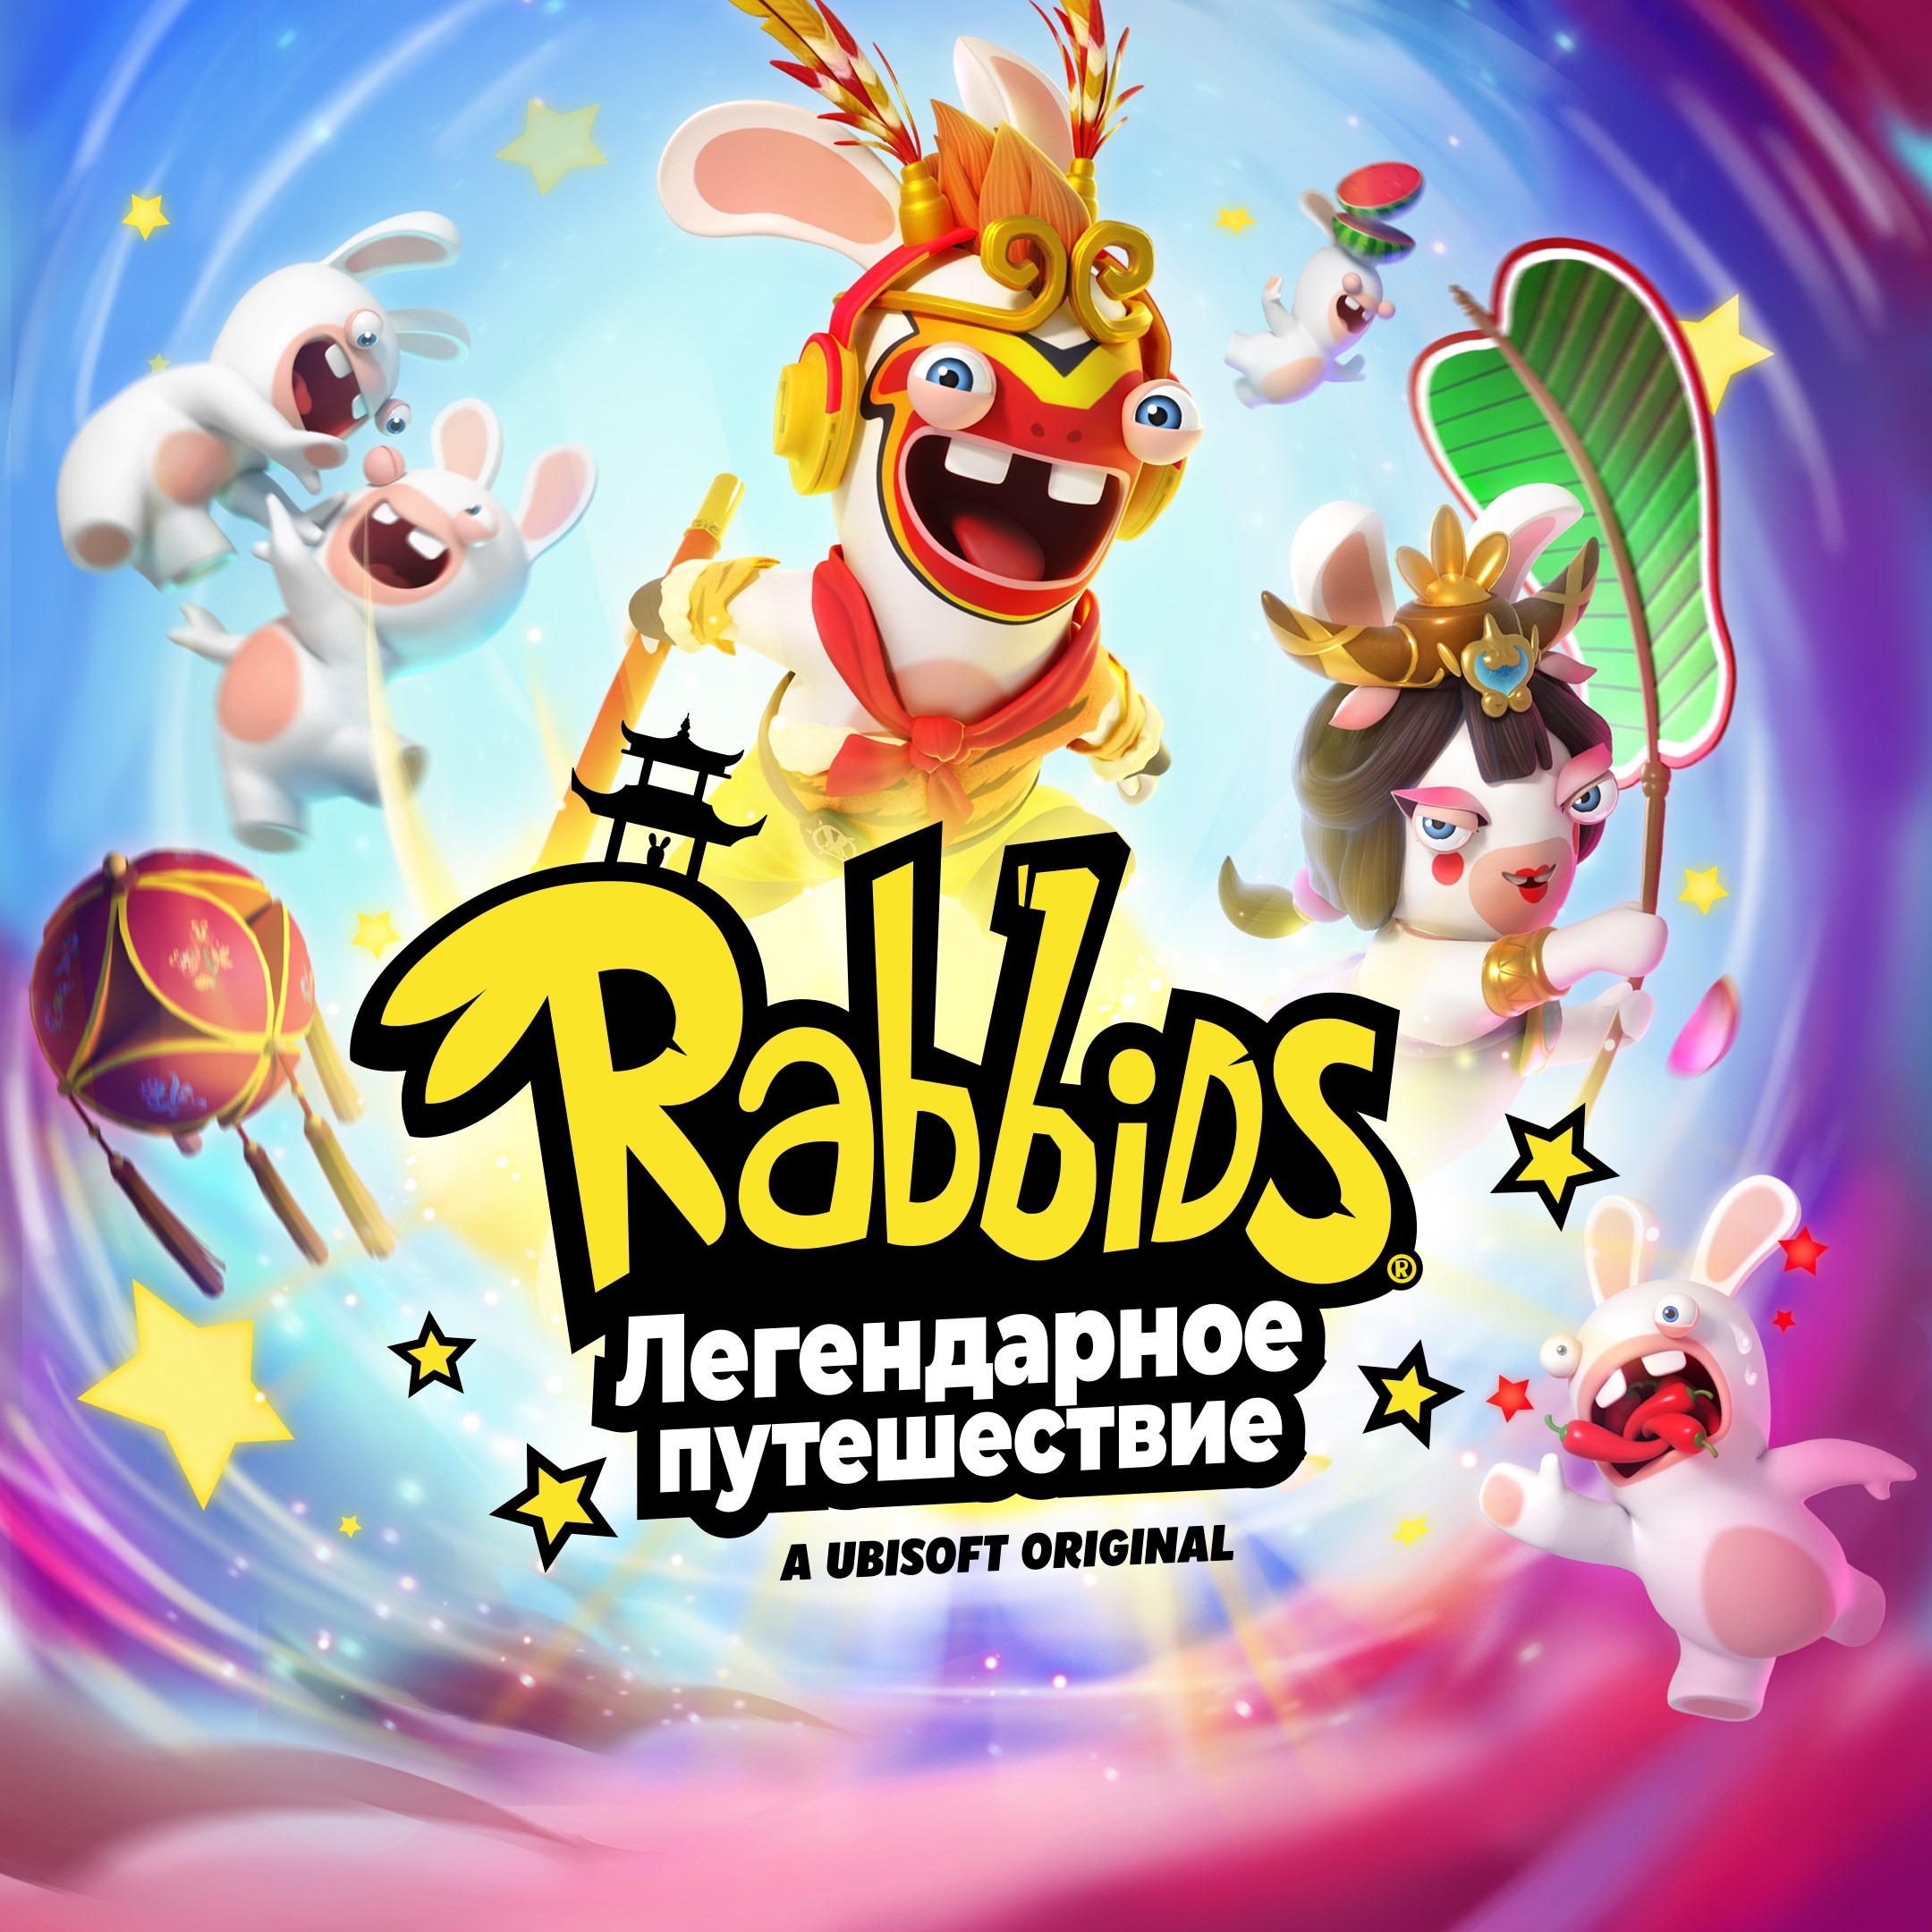 Rabbids: Party of Legends. Rabbids Party. ODDBALLERS.